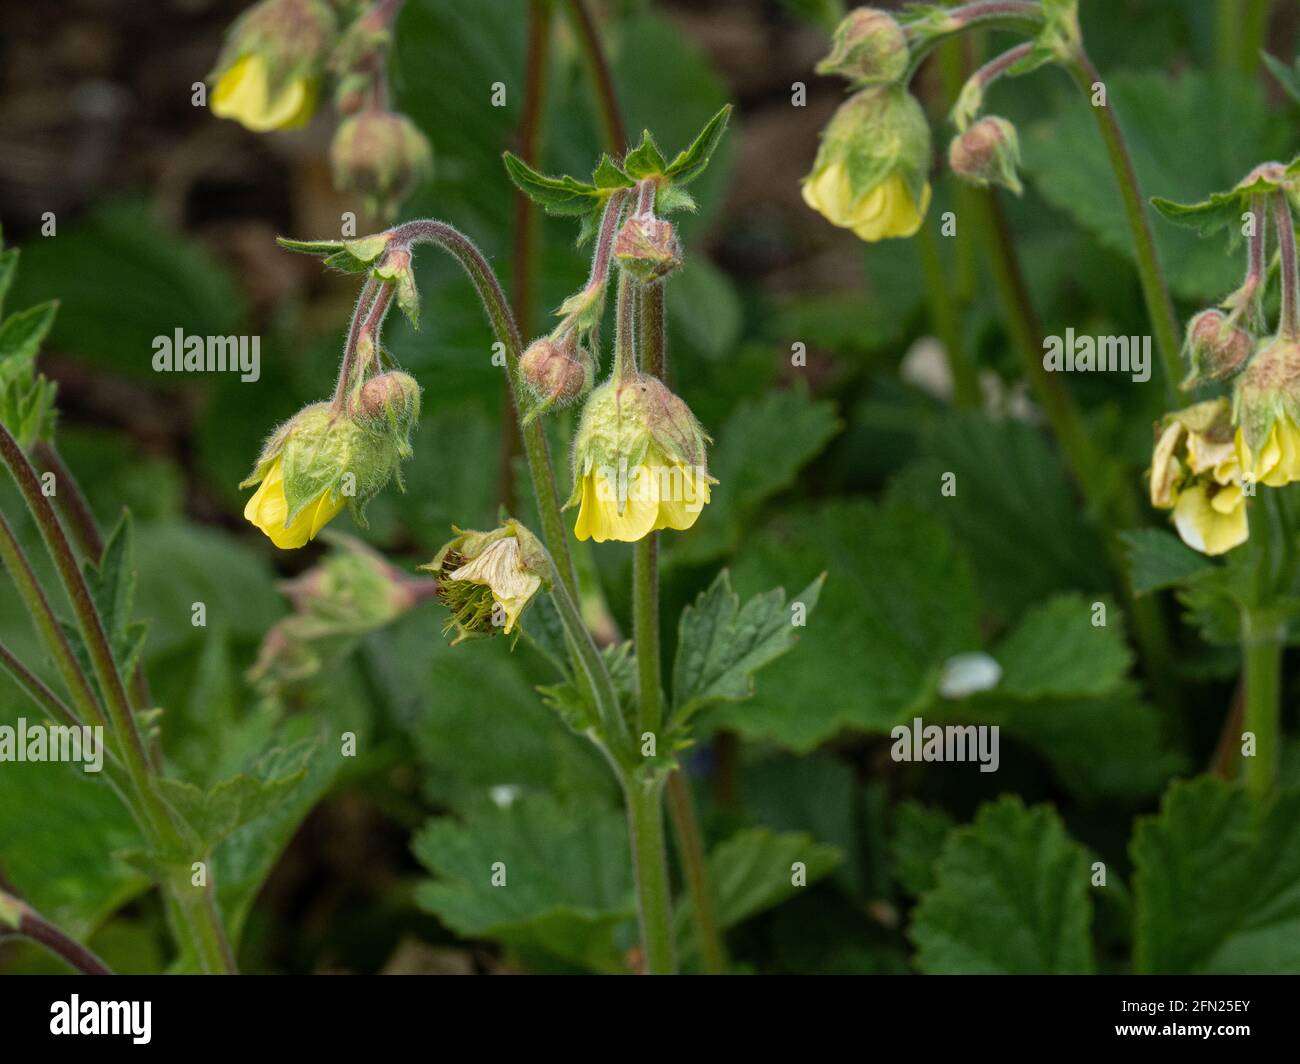 A close up of the hanging yellow bell shaped flowers of Geum x intermedium Stock Photo